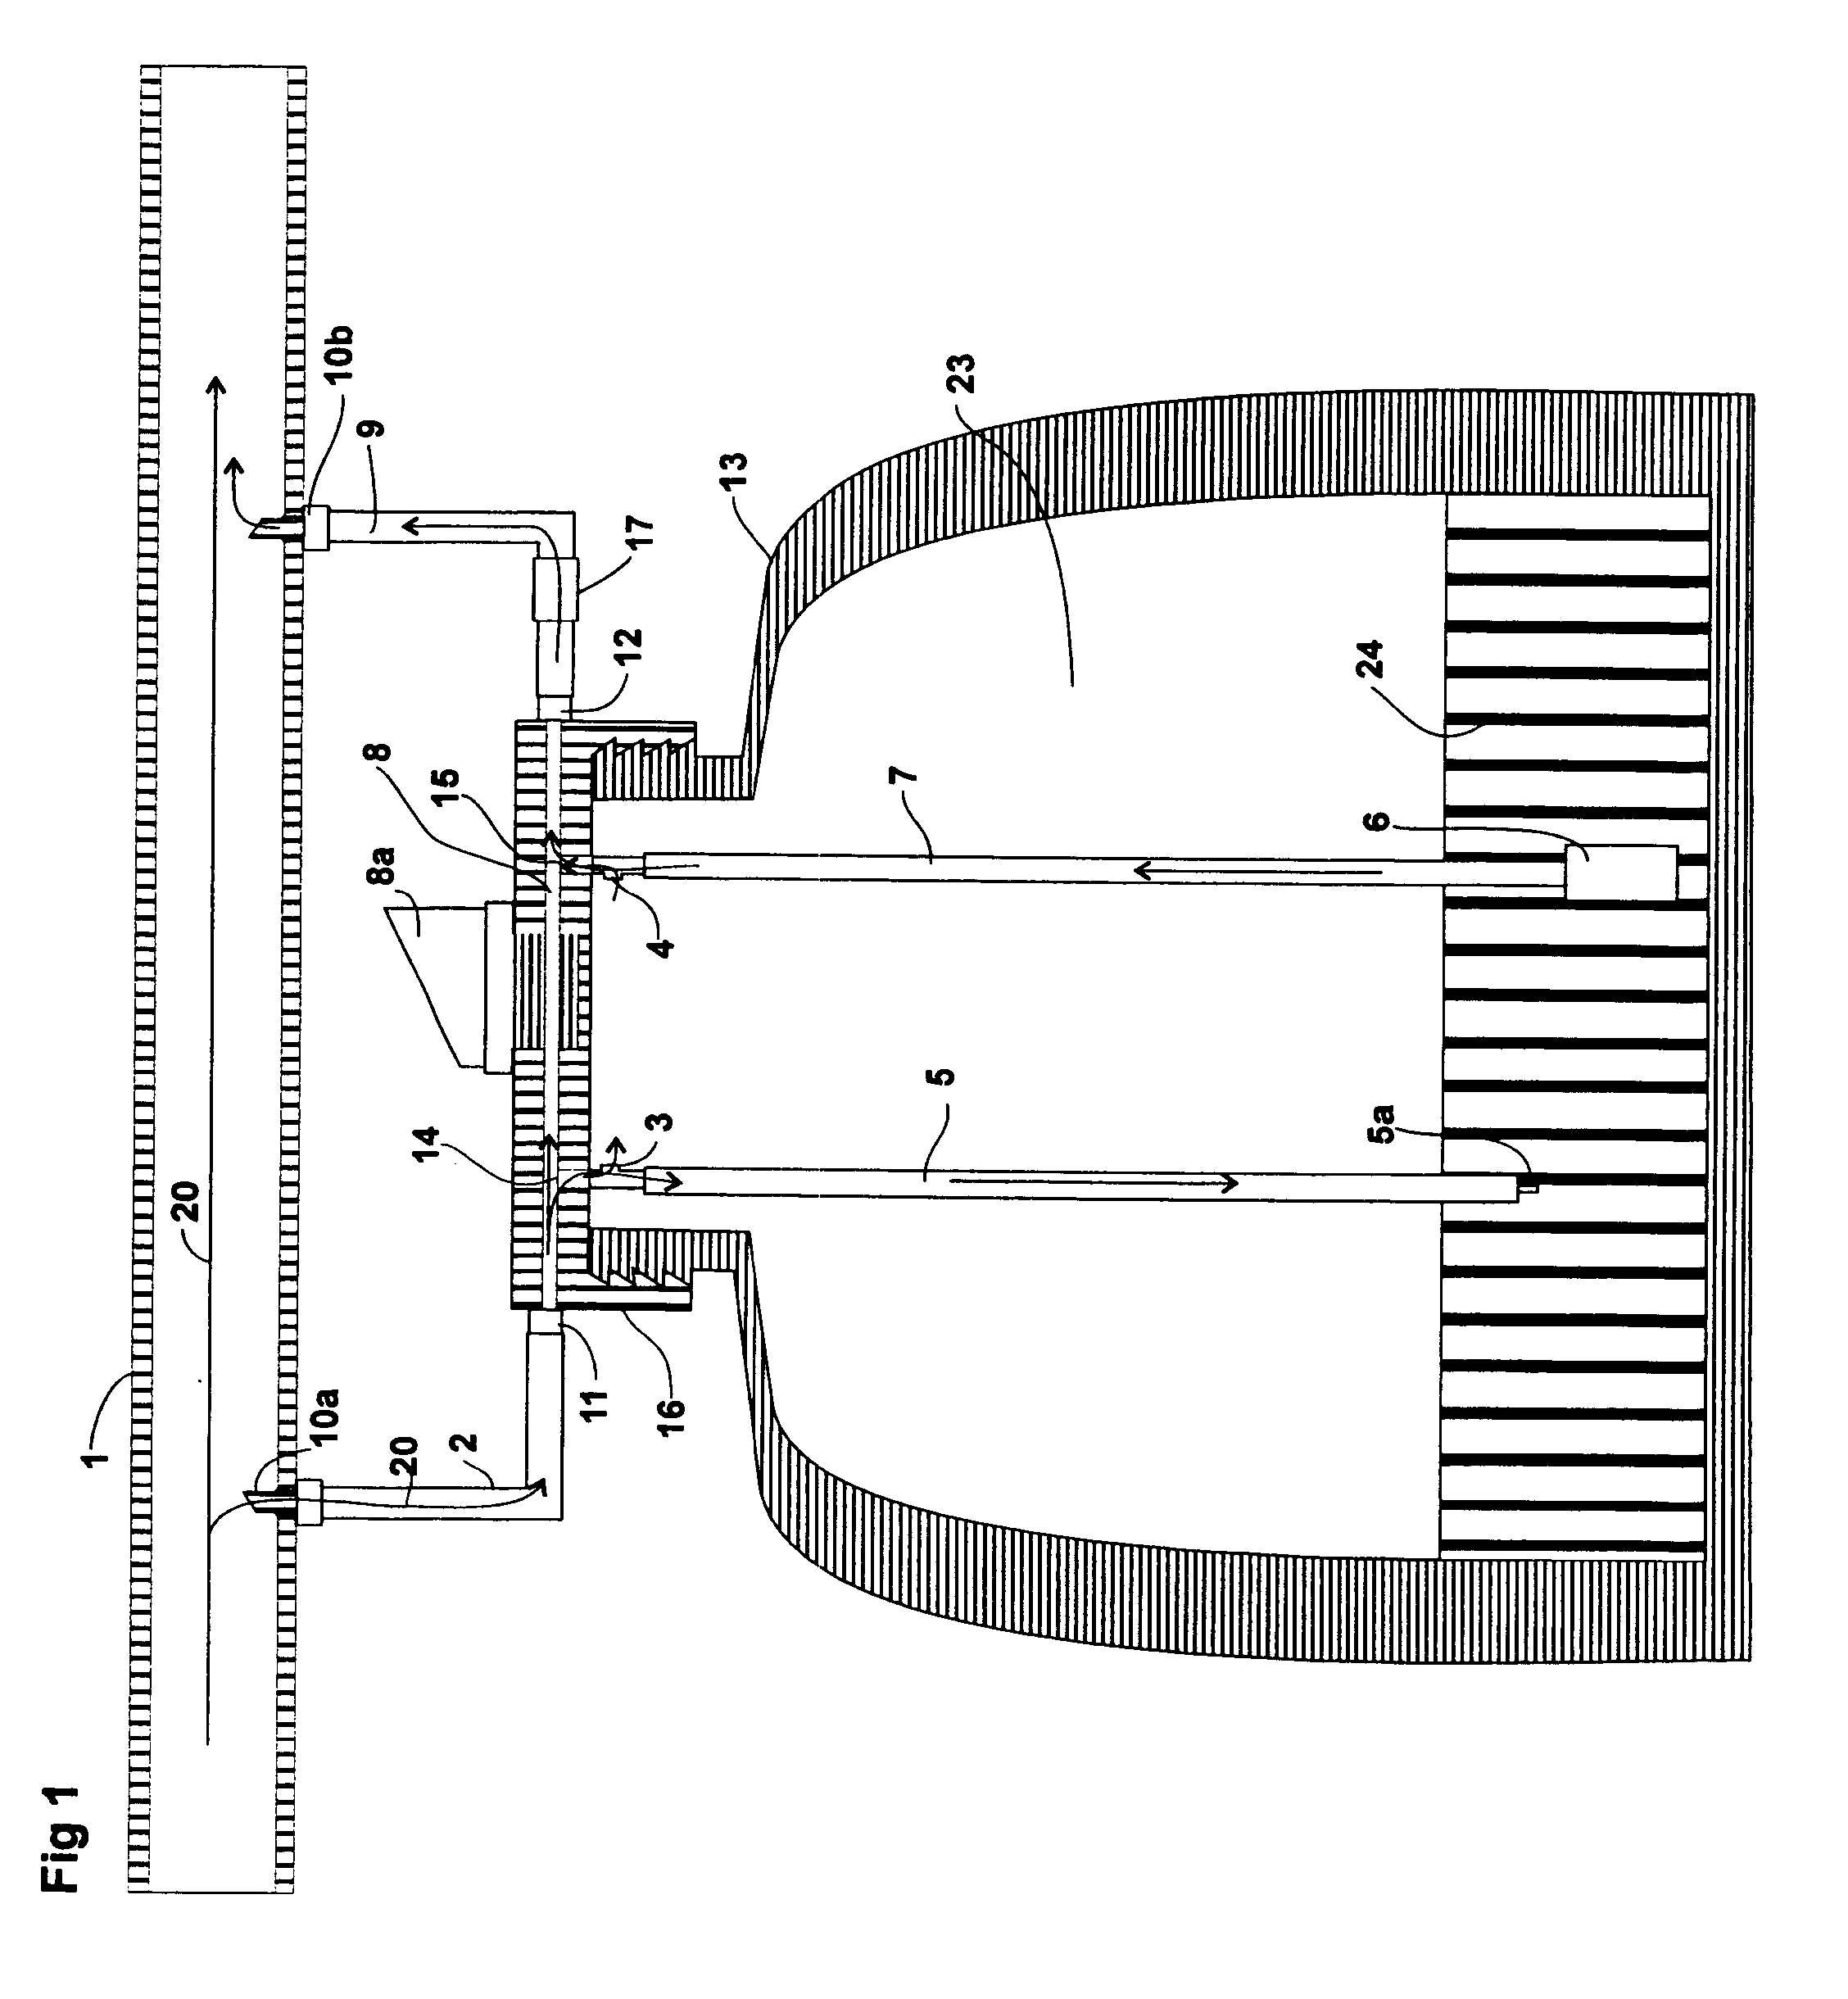 Fluid injector with vent/proportioner ports